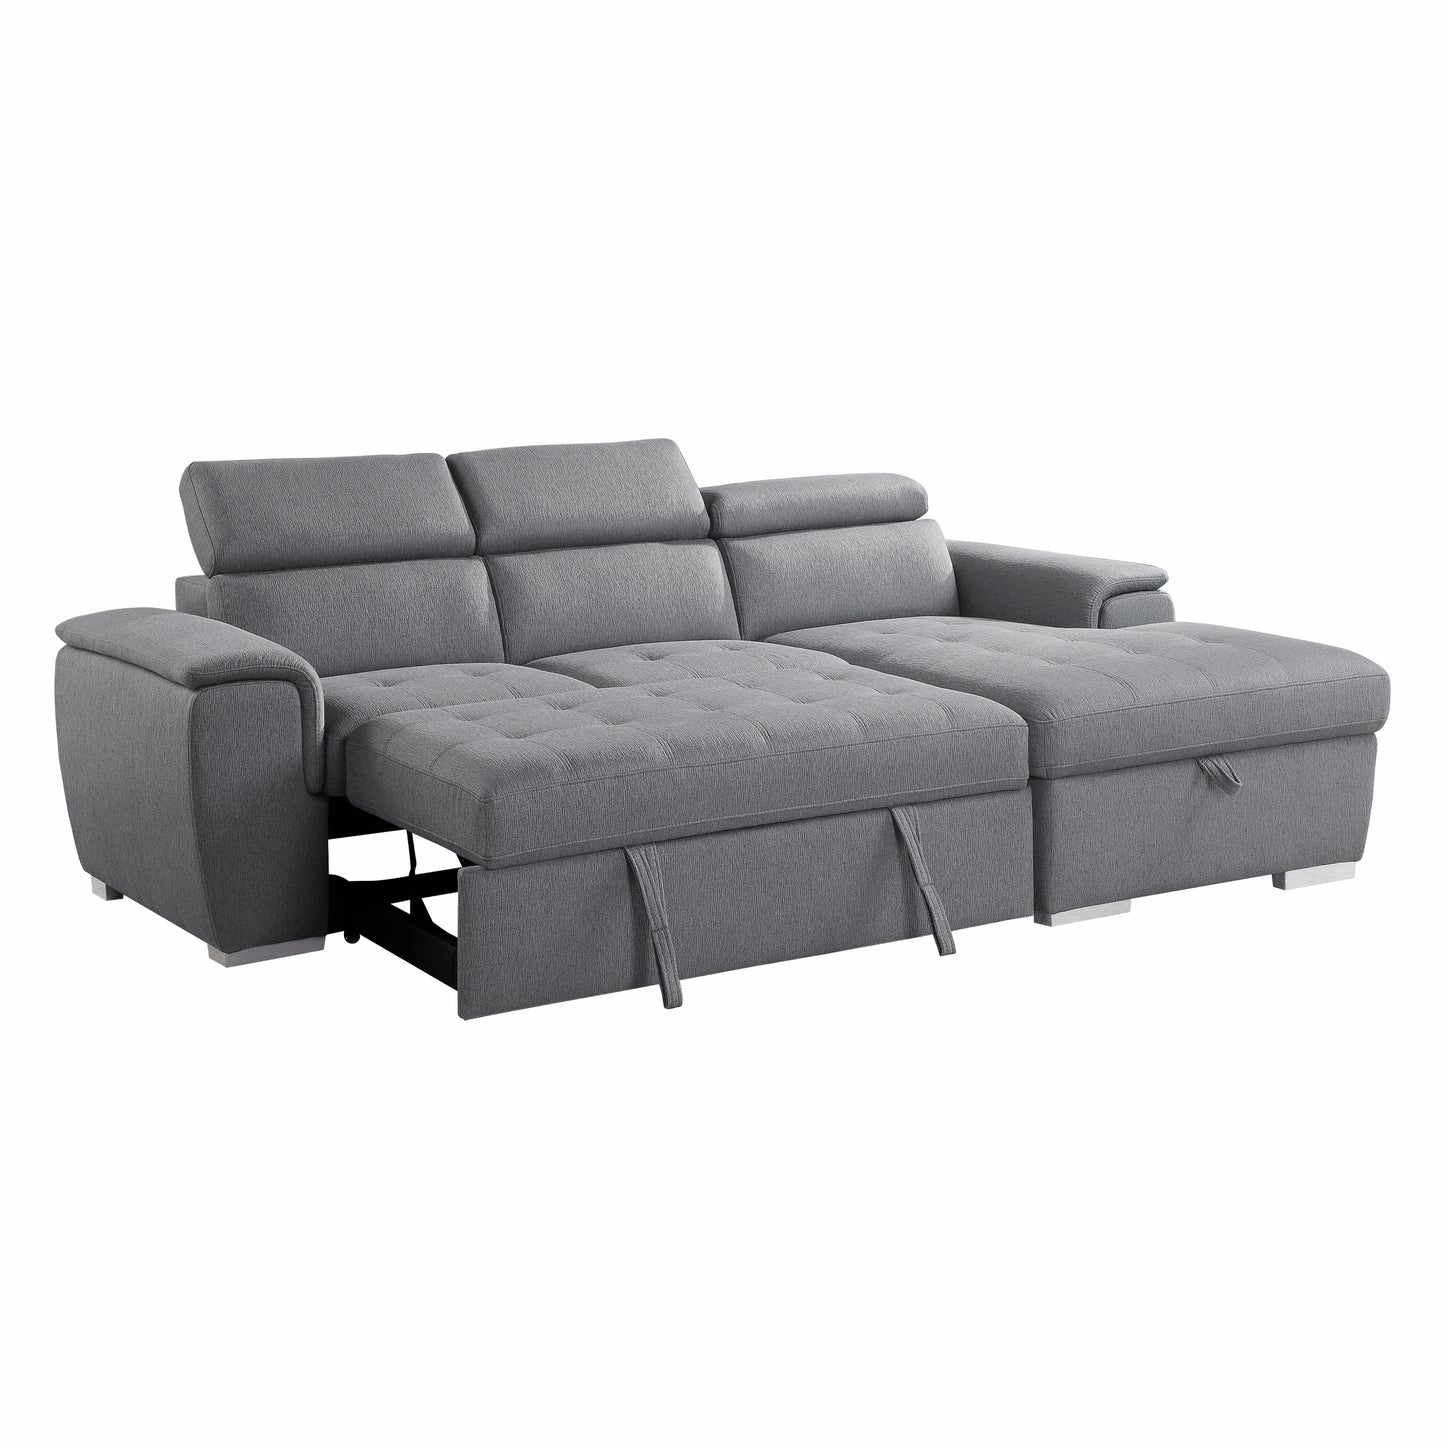 Berel 2-Pcs Sectional w/ Adj. Headrests, Pull-out Bed & Right Chaise w/Hidden Storage GREY